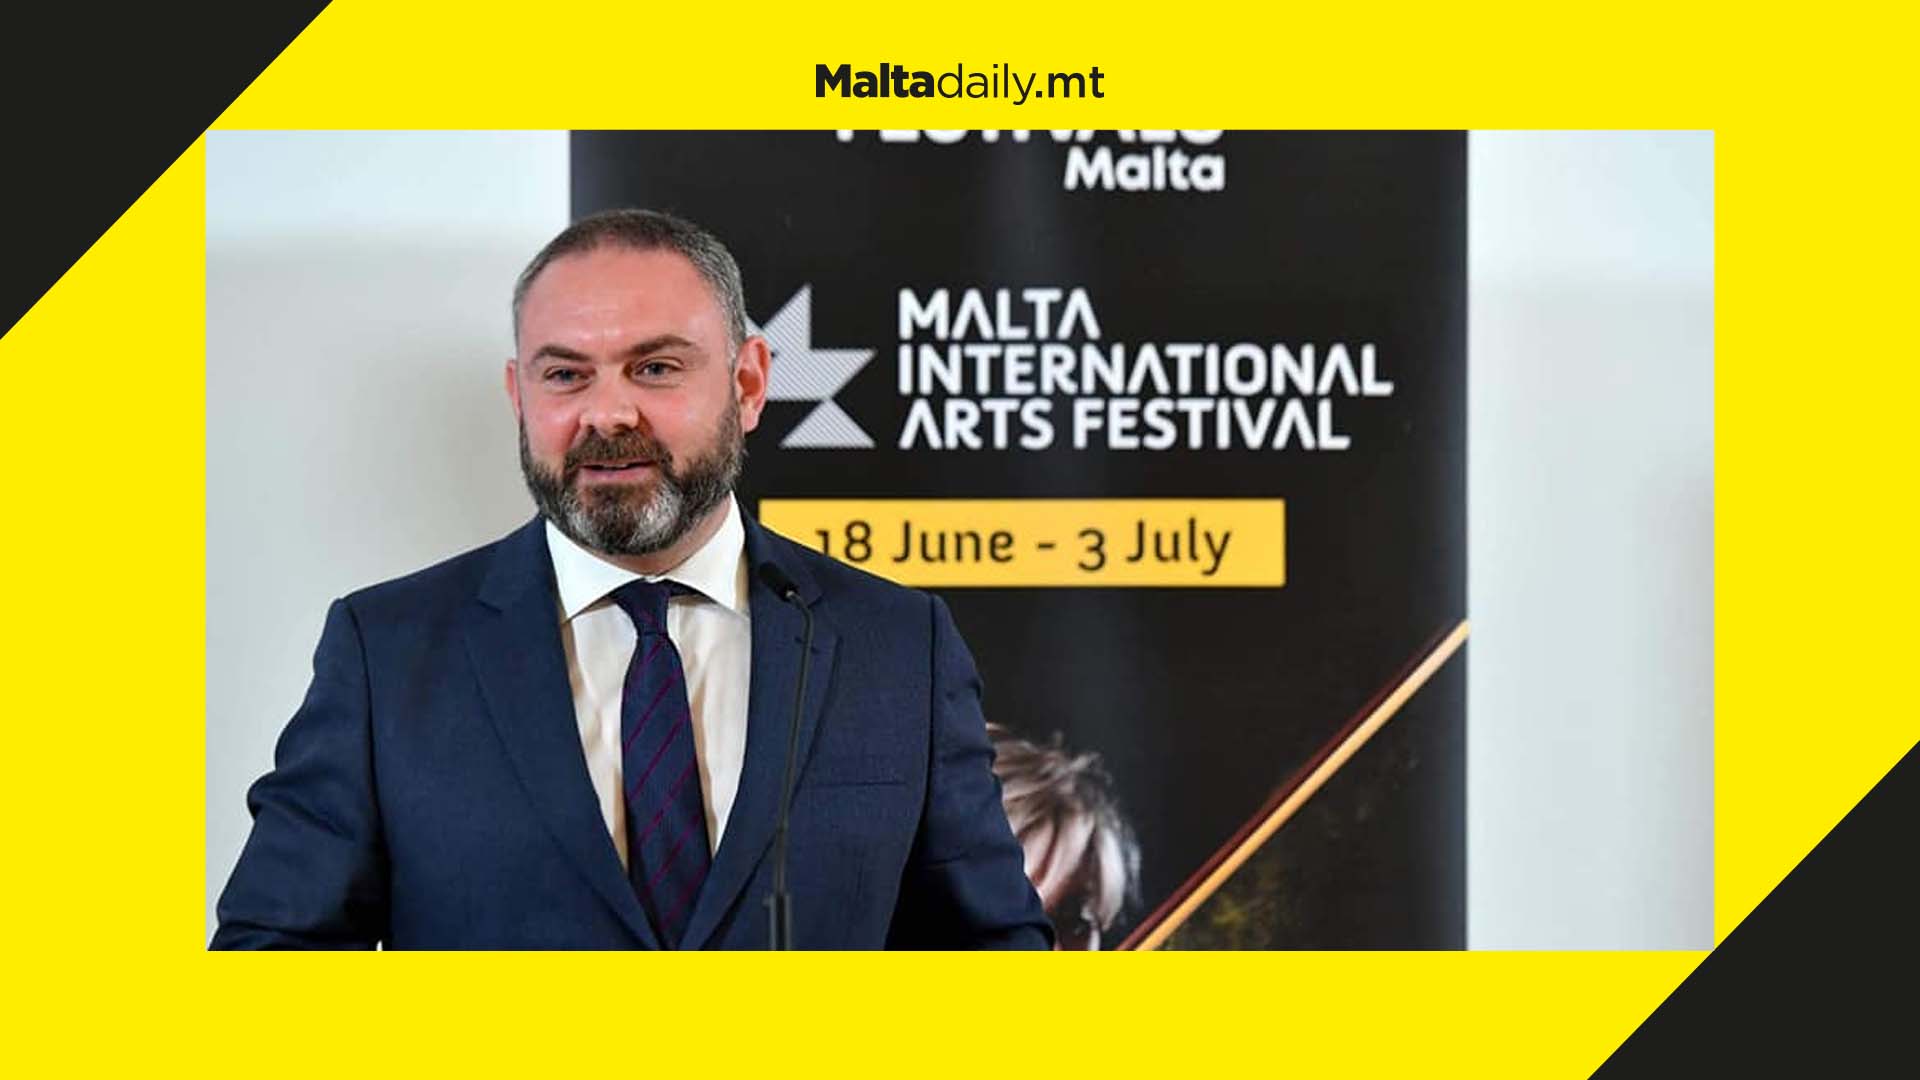 2022 summer festivals launched by Festivals Malta and Arts Minister